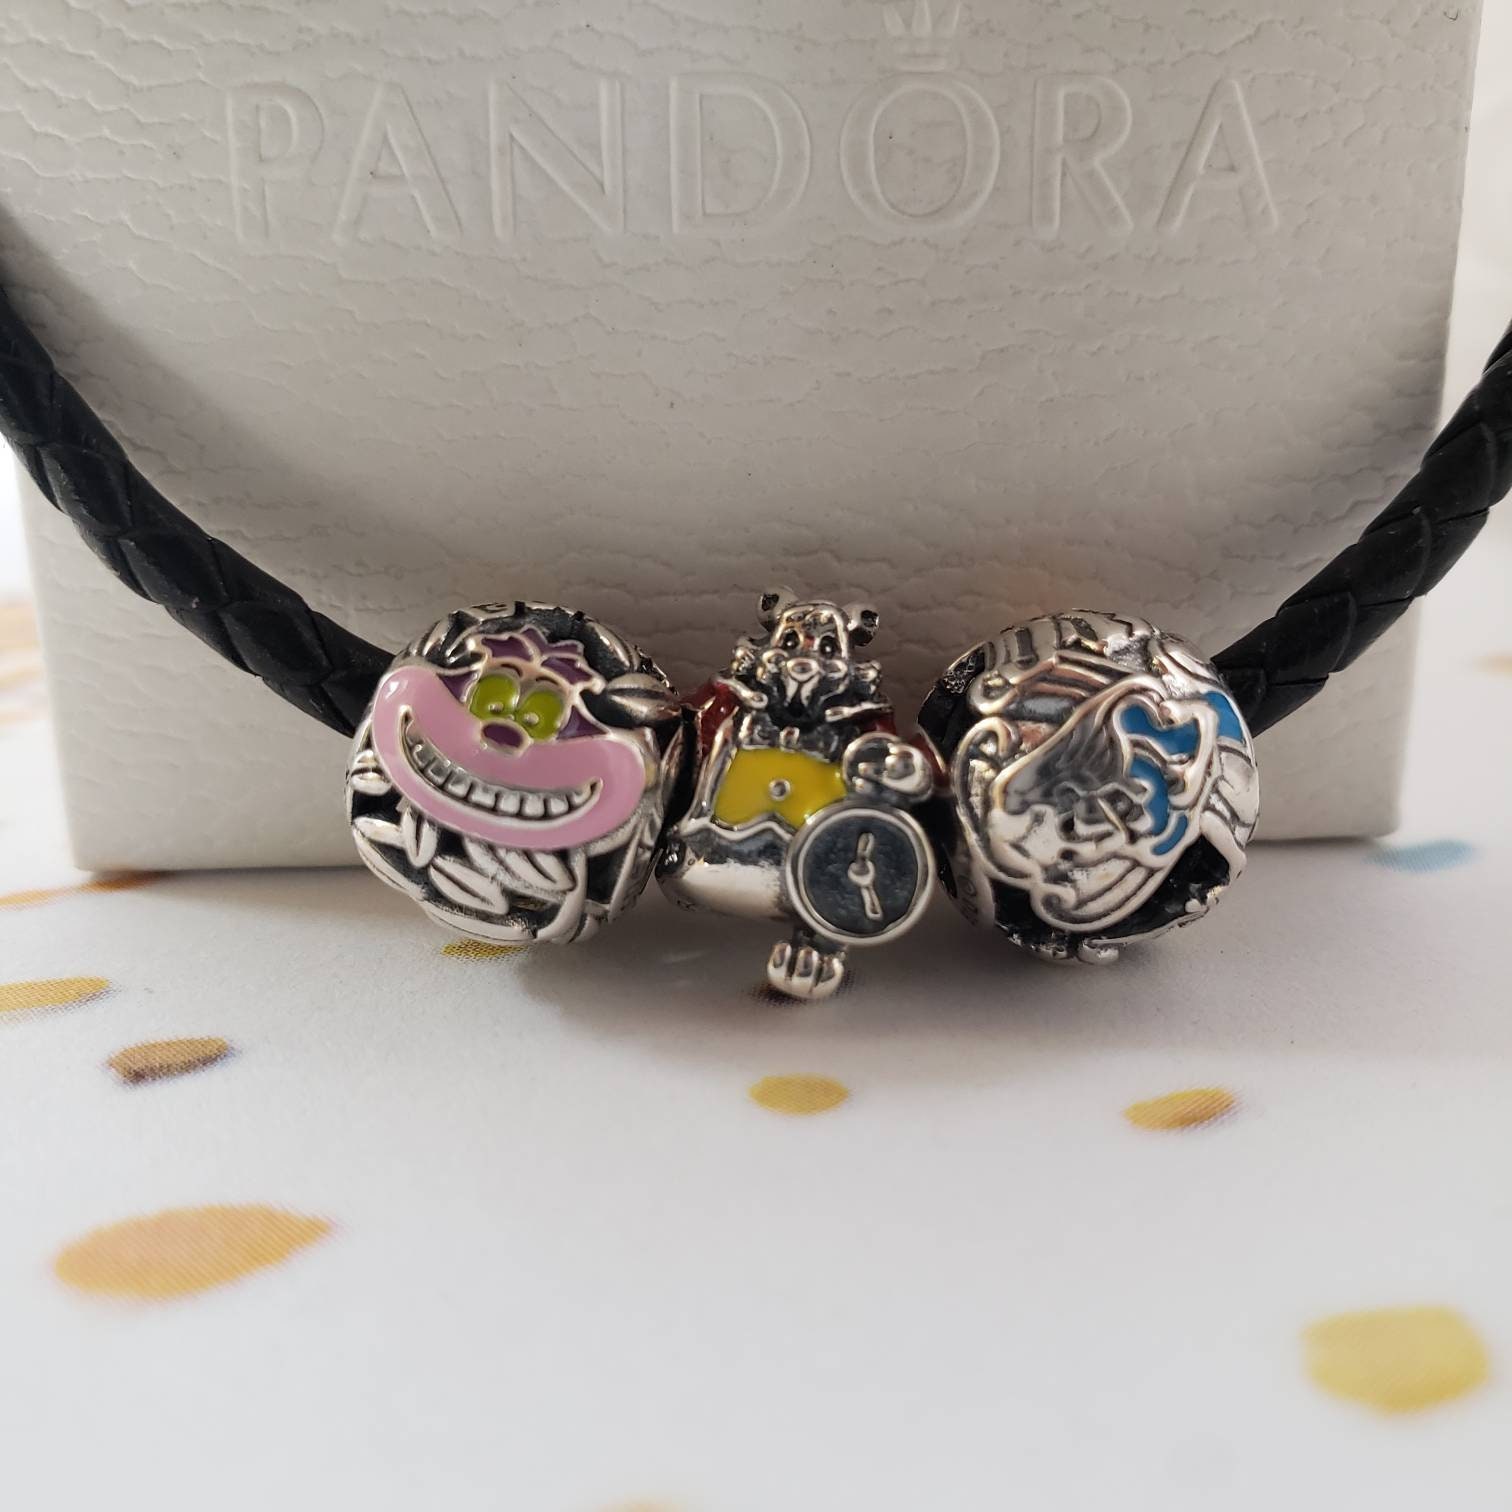 Charms of Alice in Wonderland in sterling silver or 9ct gold